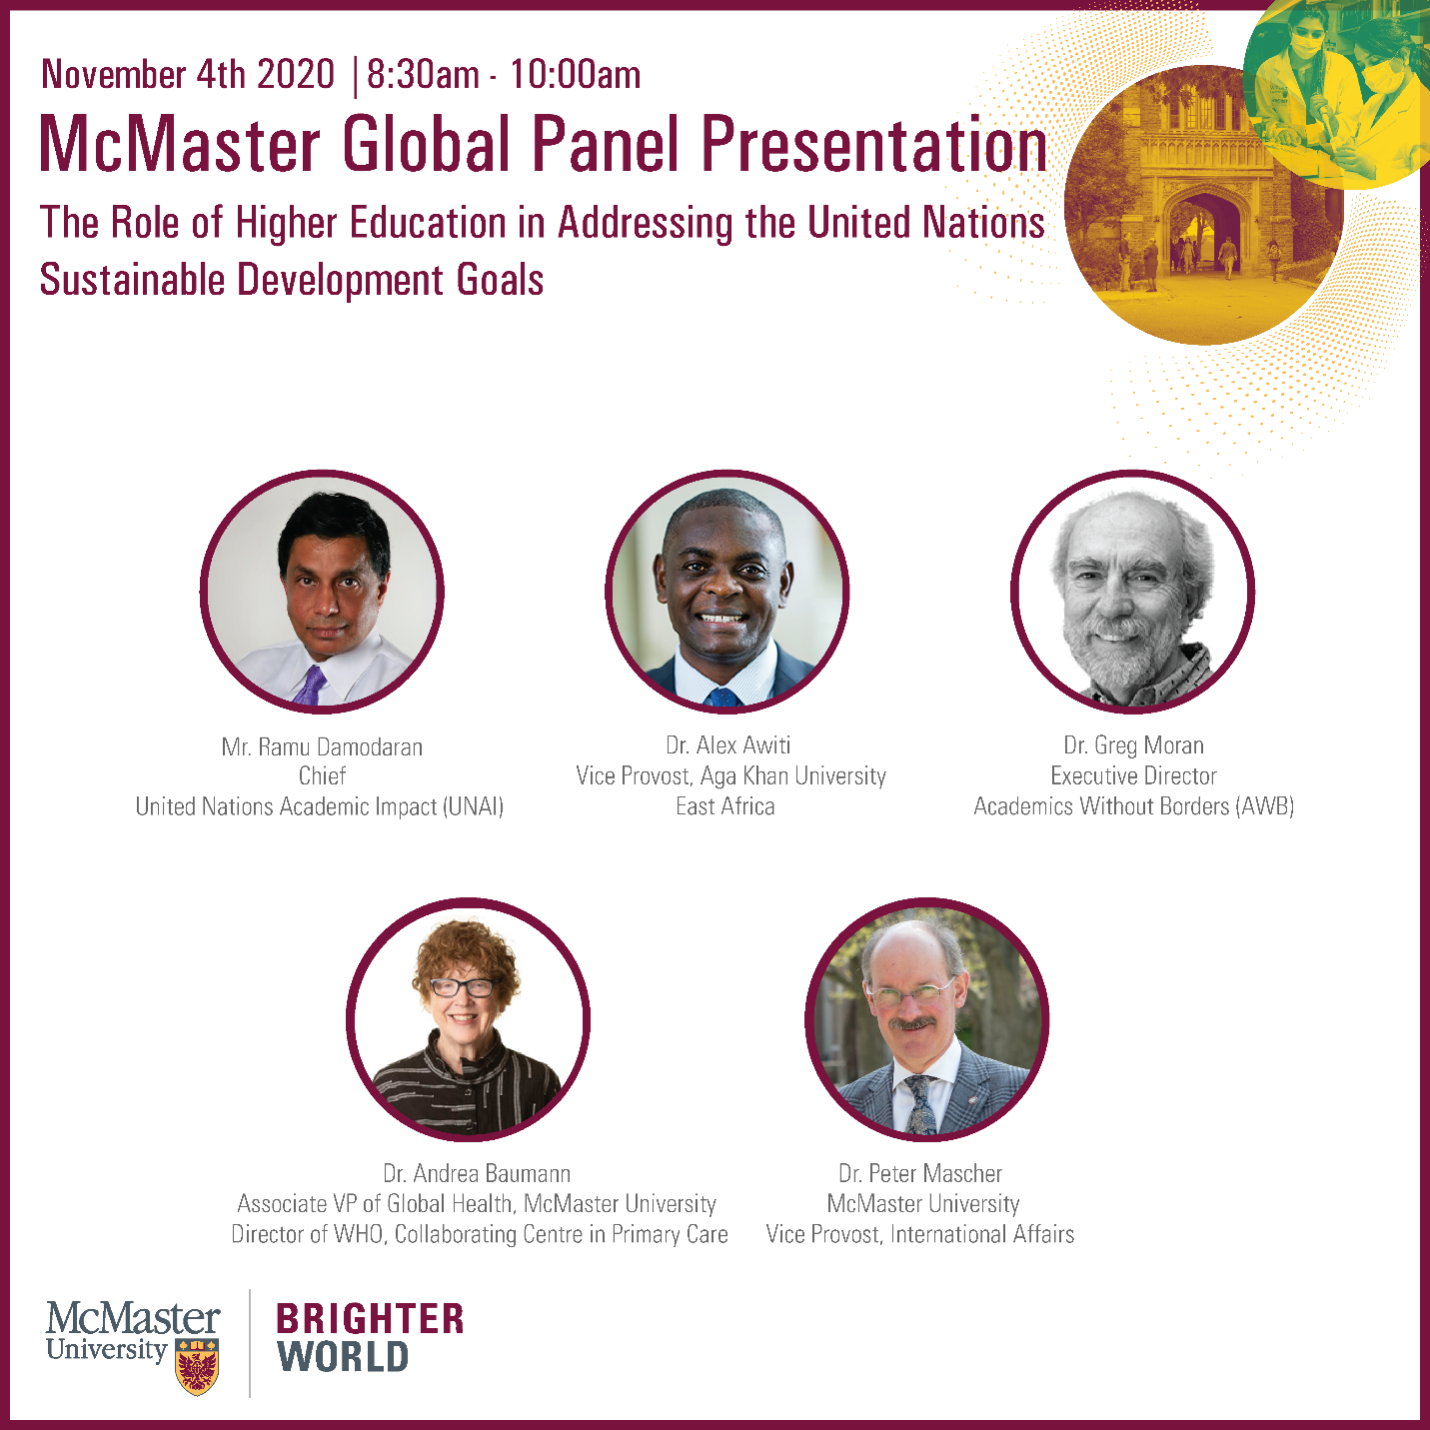 McMaster Global Panel Presentation Poster featuring speakers from the event on November 4, 2020